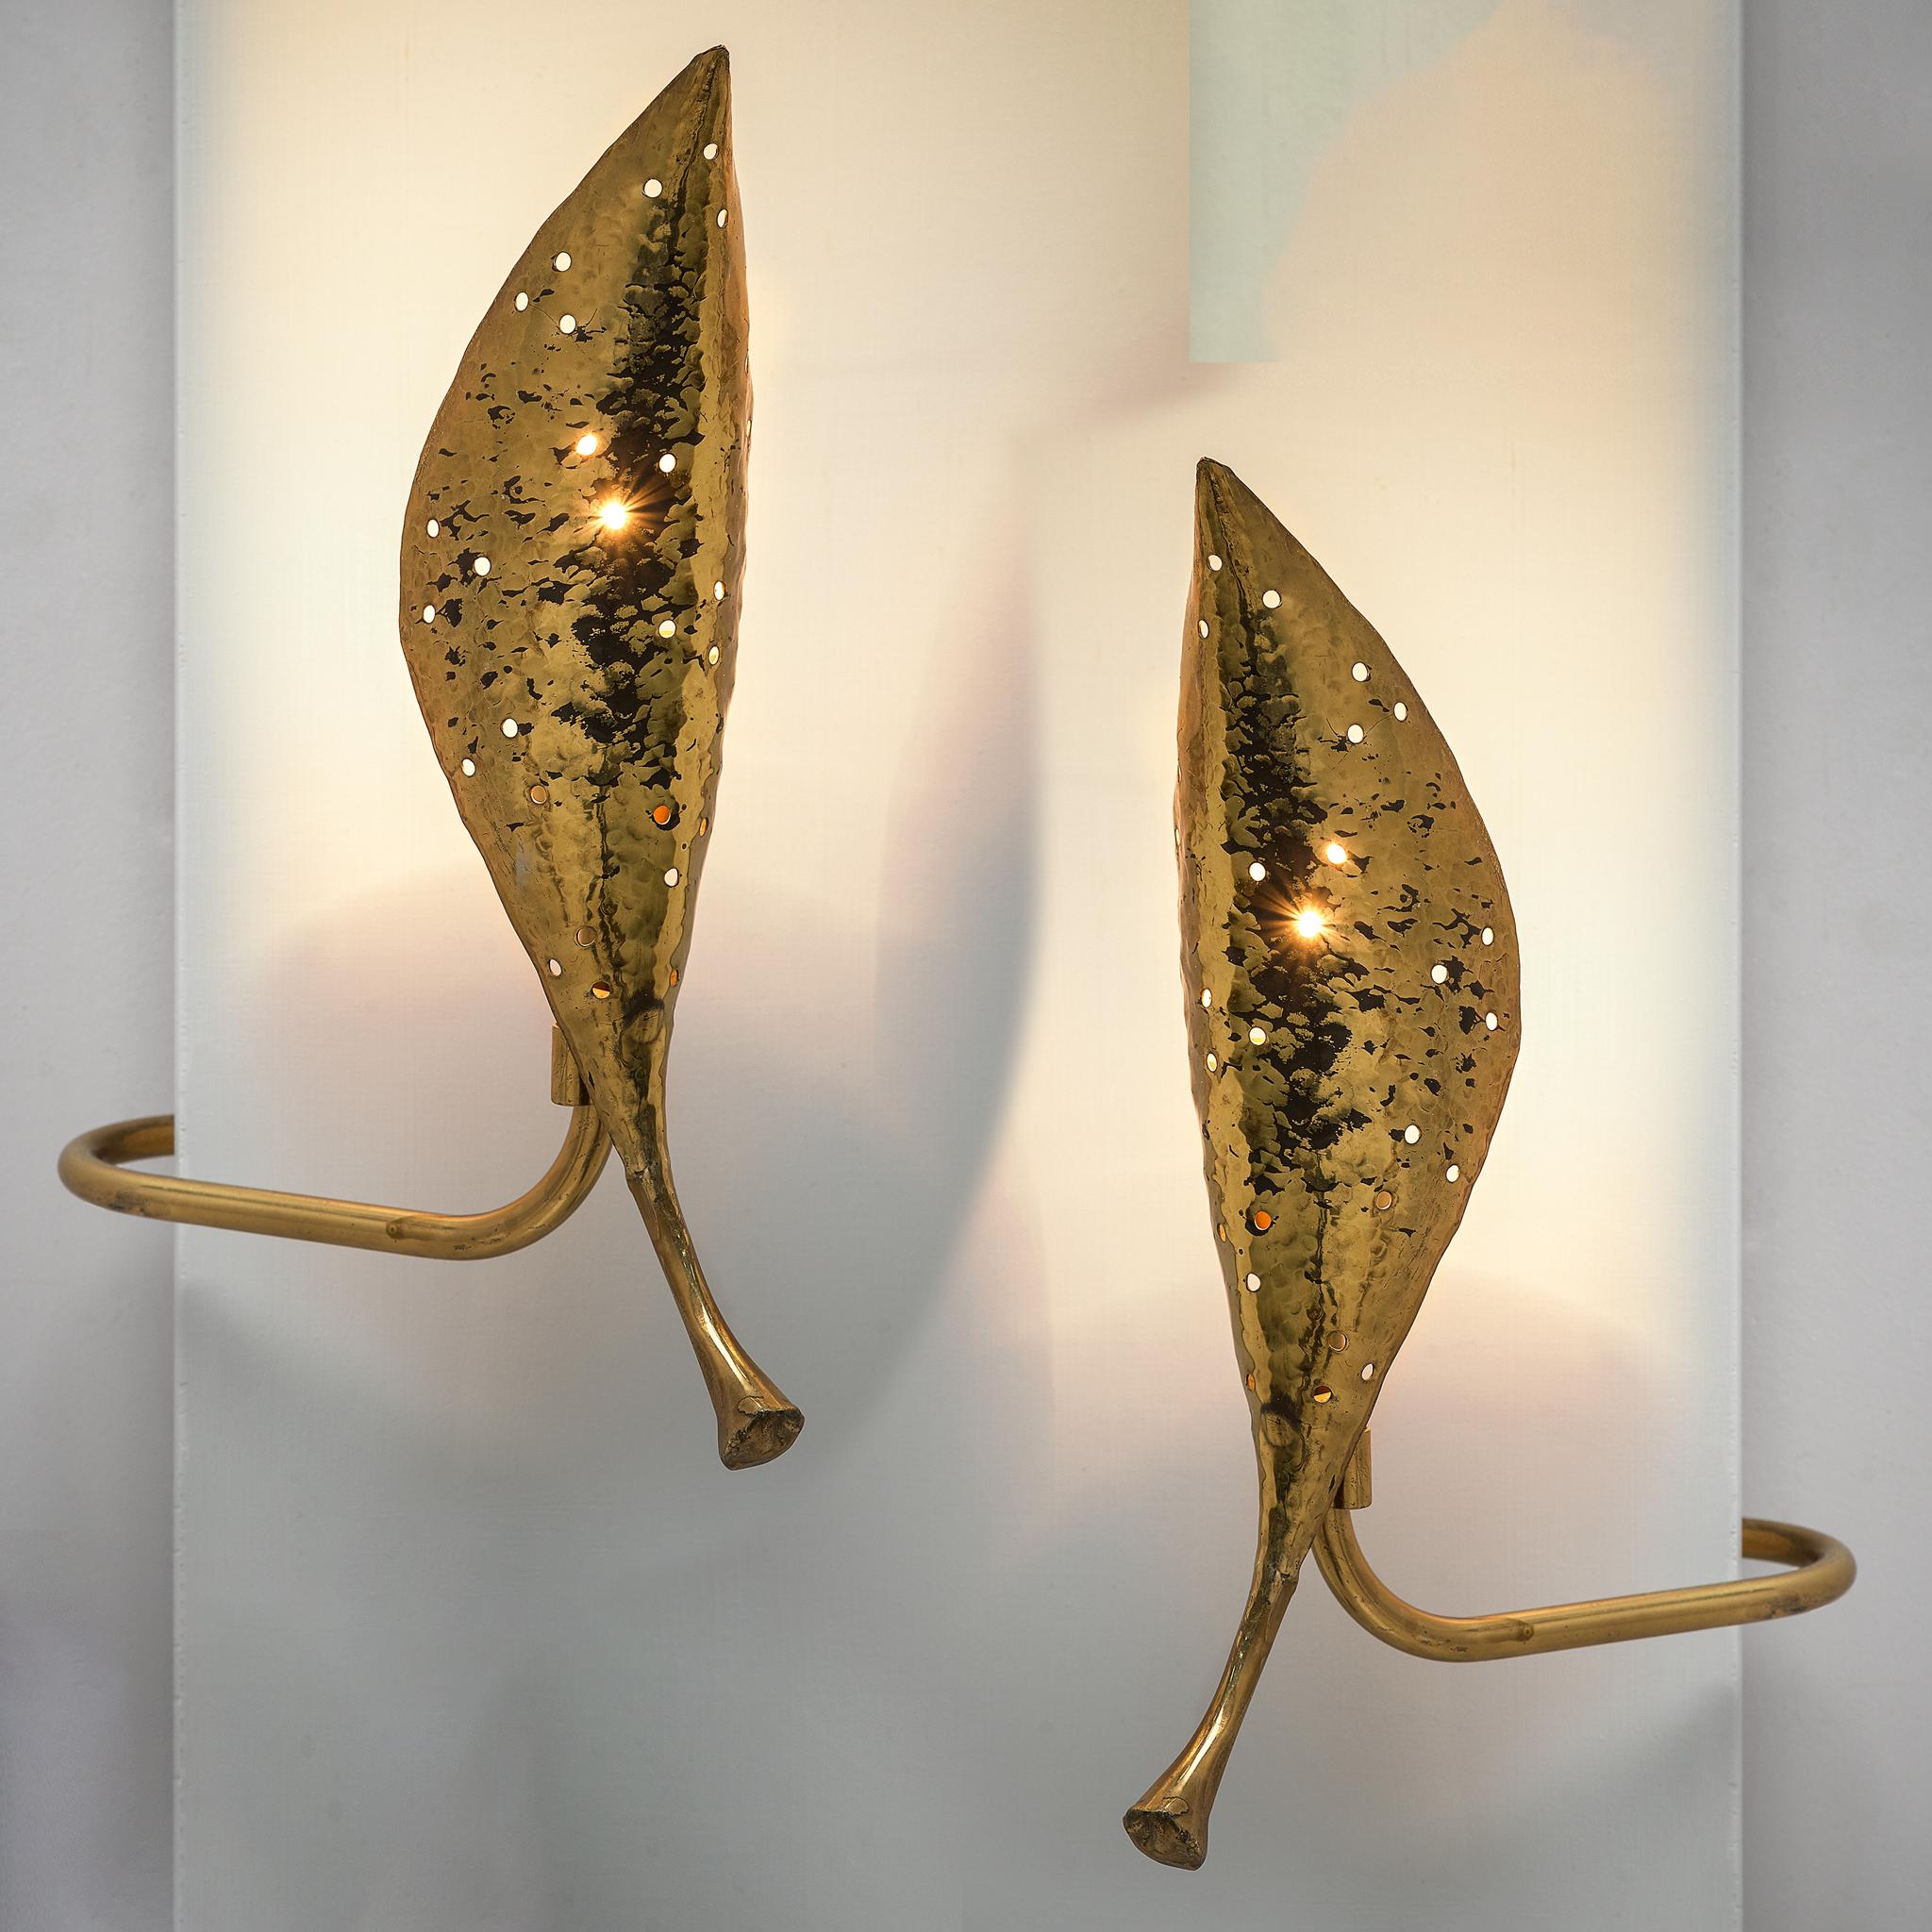 Angelo Lelii, ‘leaf’ wall lights, brass, Italy, circa 1951

These one-of-a-kind wall lights by Angelo Lelii strongly remind of his chandelier model 12369, which we currently have in our collection too. In a period of his career, Lelii designed